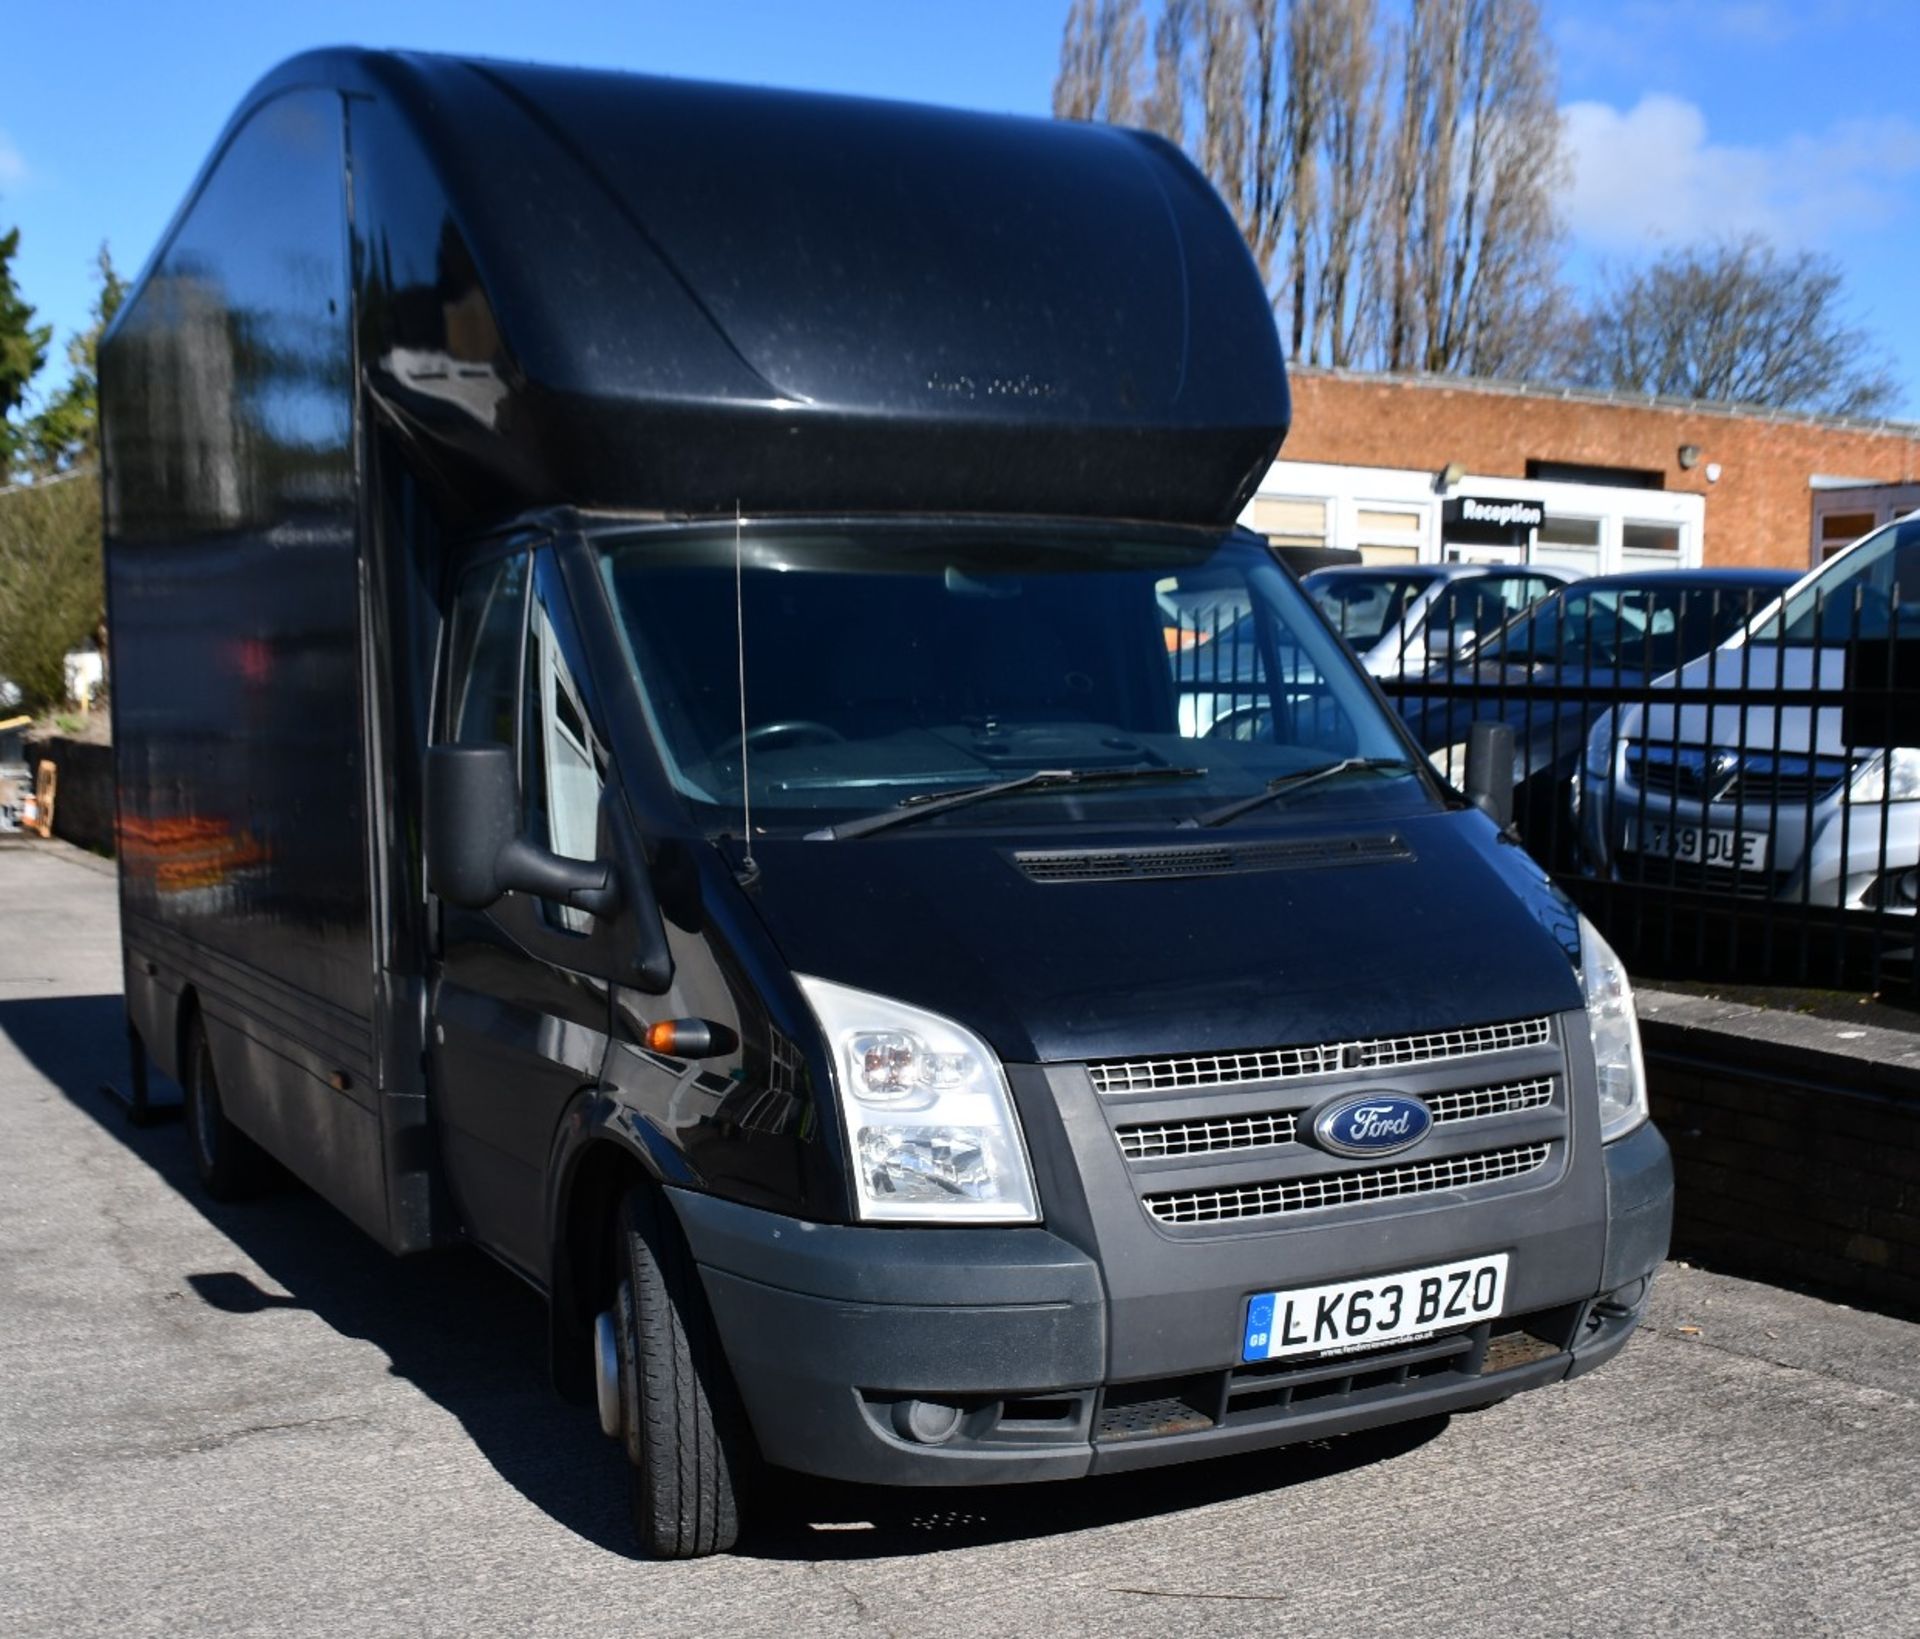 A 2013 Ford Transit 350 LWB diesel with Luton and tail lift, manual, engine 2200, approximately